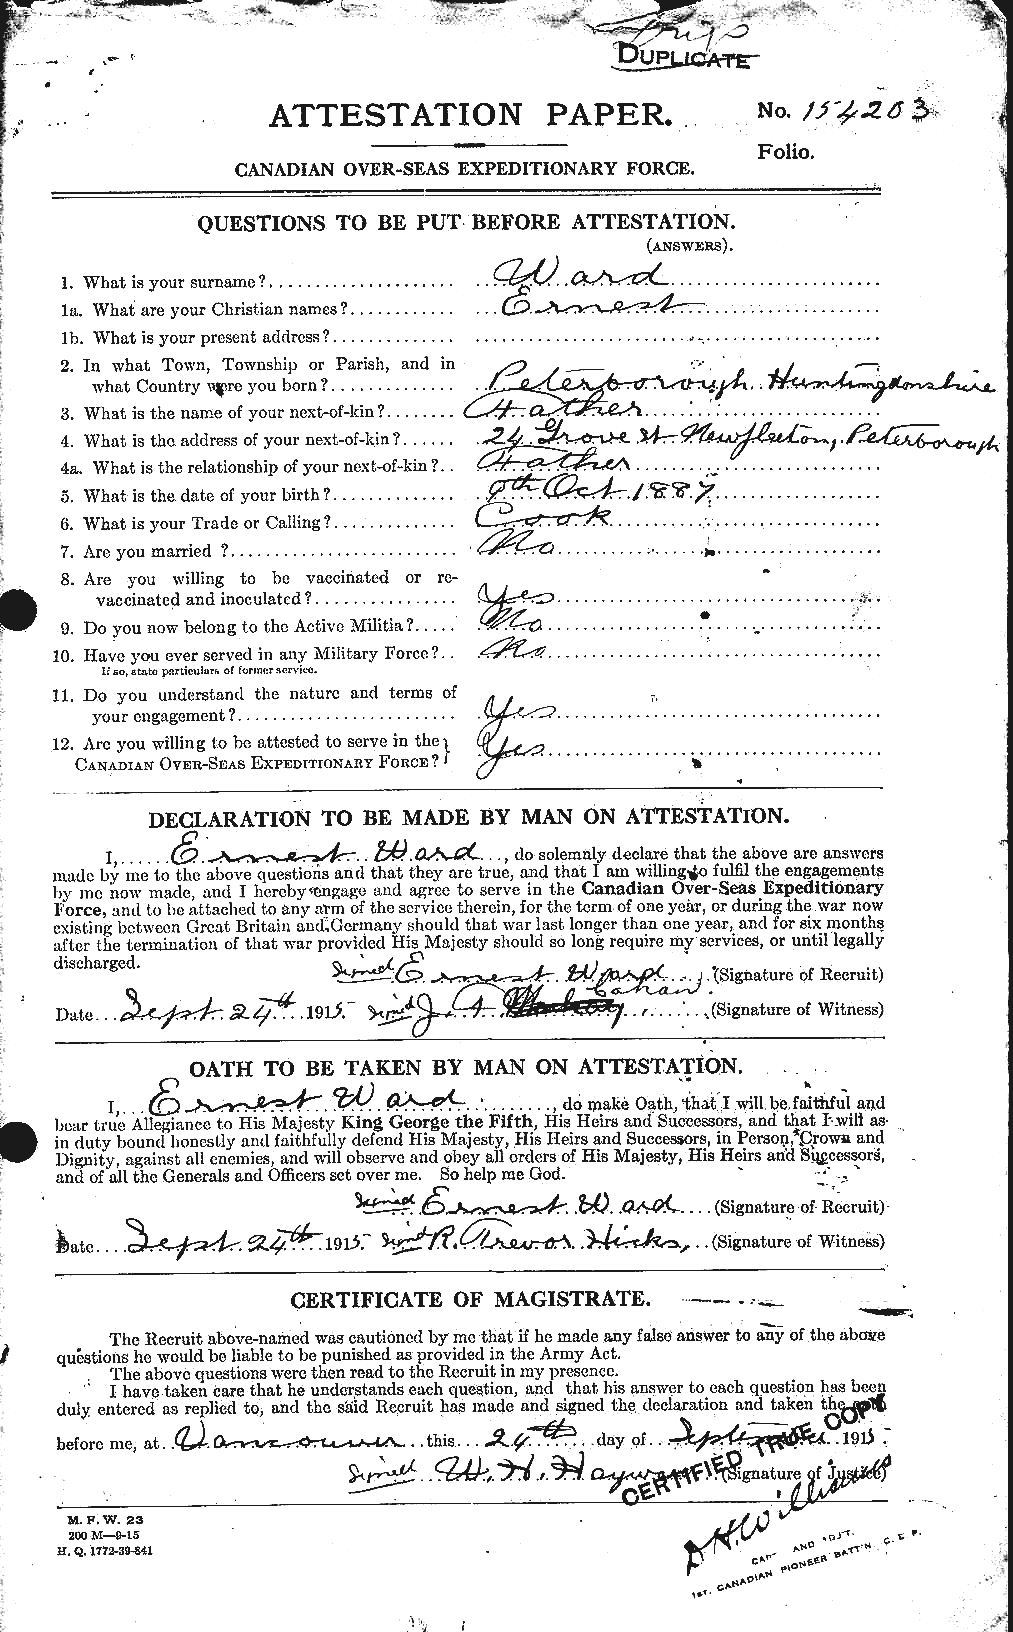 Personnel Records of the First World War - CEF 657666a